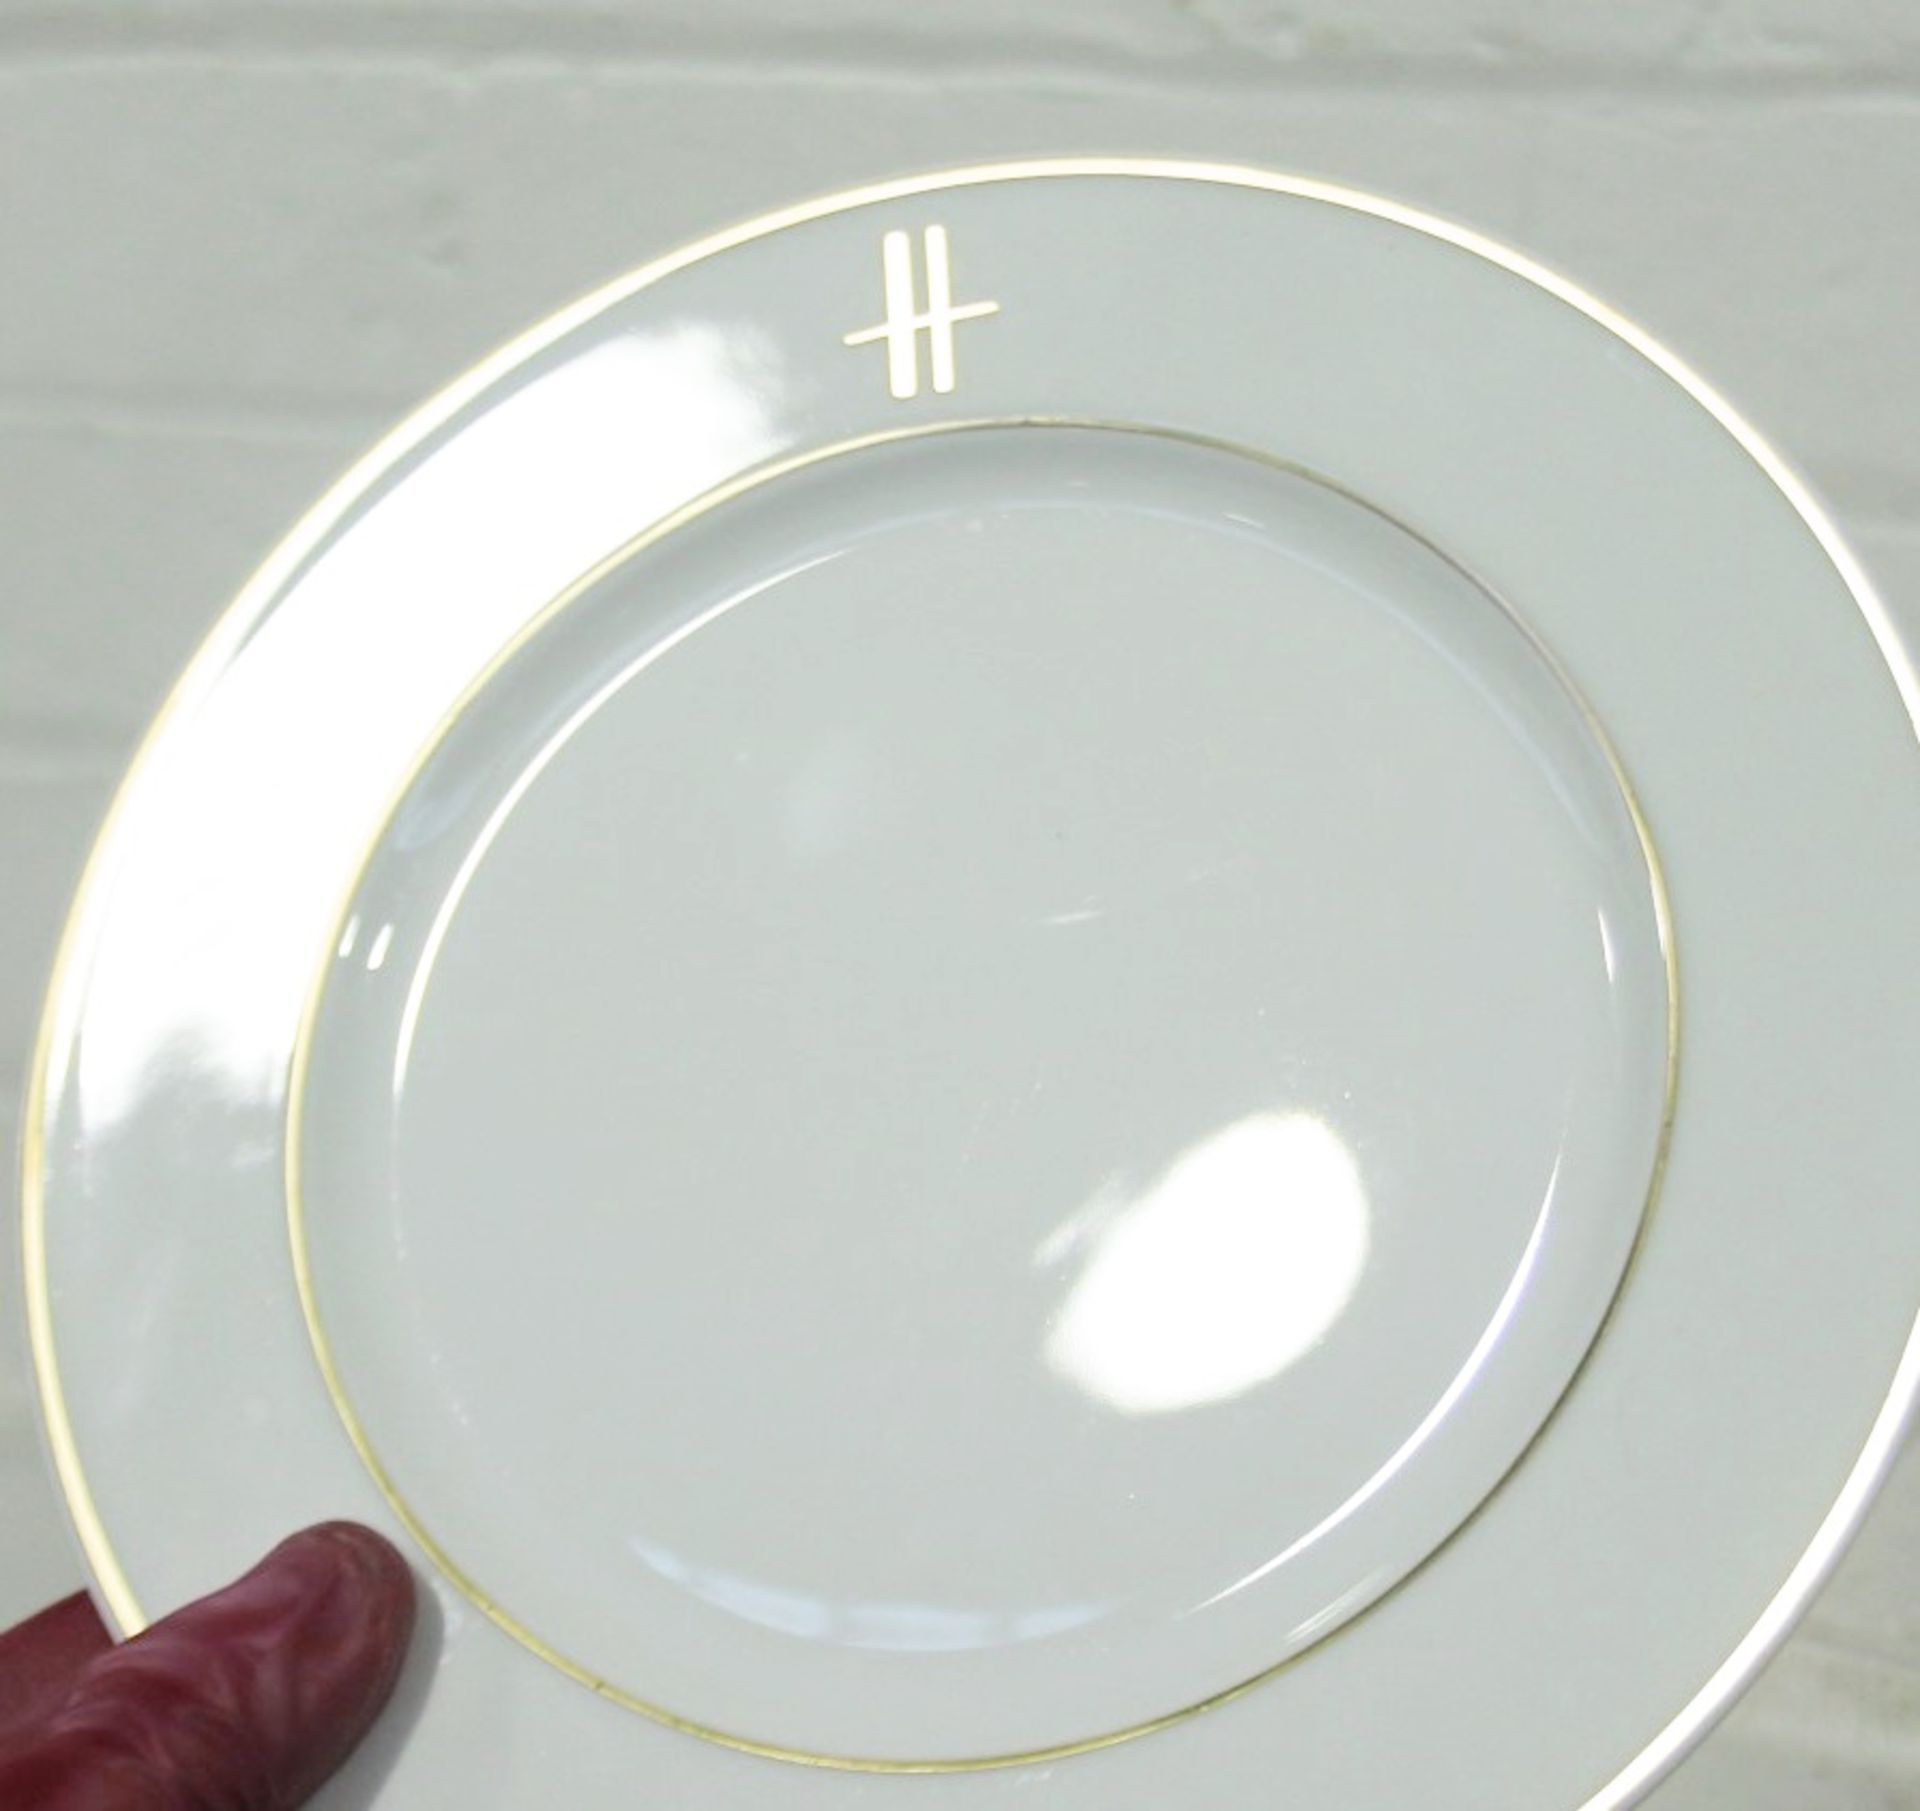 50 x PILLIVUYT Porcelain Side / Starter Plates In White Featuring 'Famous Branding' In Gold - Image 2 of 5